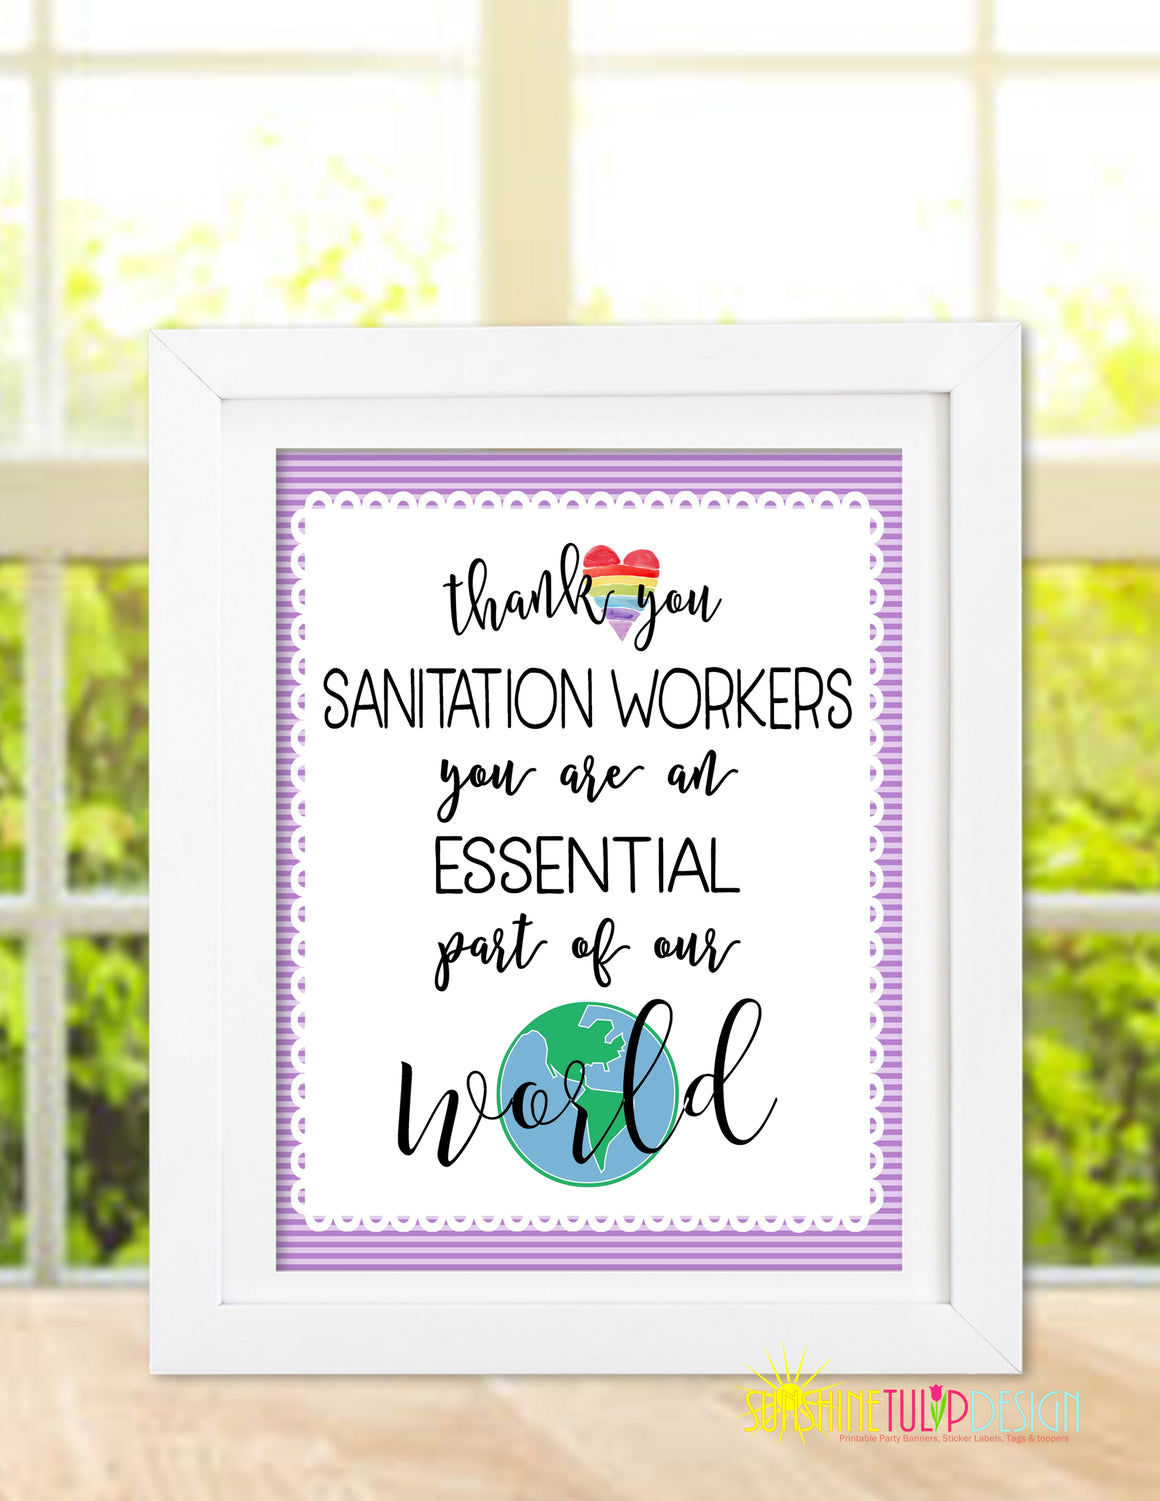 Printable Sign for Essential Workers, Sanitation Workers by Sunshinetulipdesign